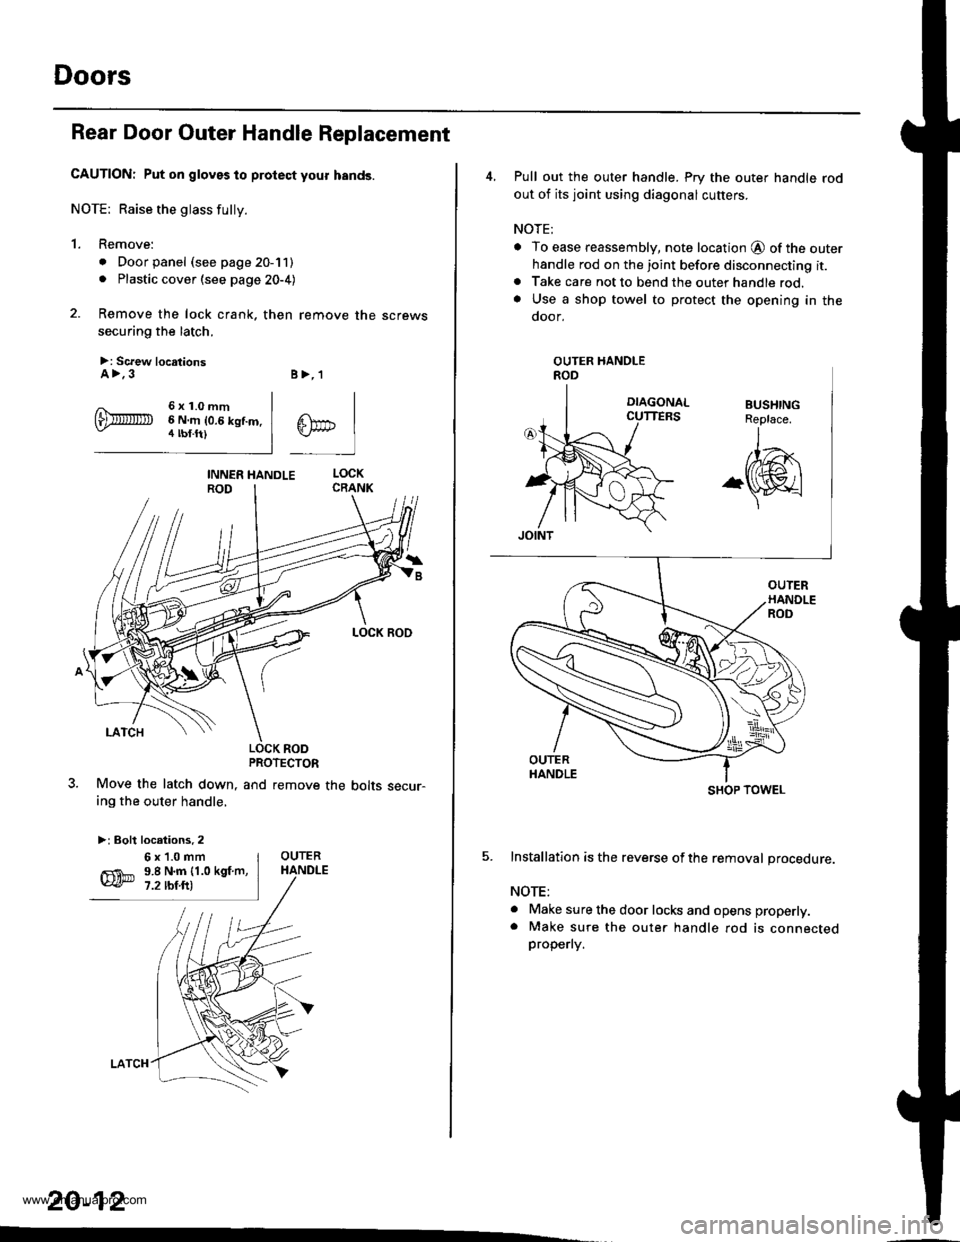 HONDA CR-V 1999 RD1-RD3 / 1.G Workshop Manual 
Doors
Rear Door Outer Handle Replacement
CAUTION: Put on gloves to protect your hands.
NOTE: Raise the glass fully.
1. Remove:
. Door panel (see page 20-11). Plastic cover (see page 20-4)
2. Remove t